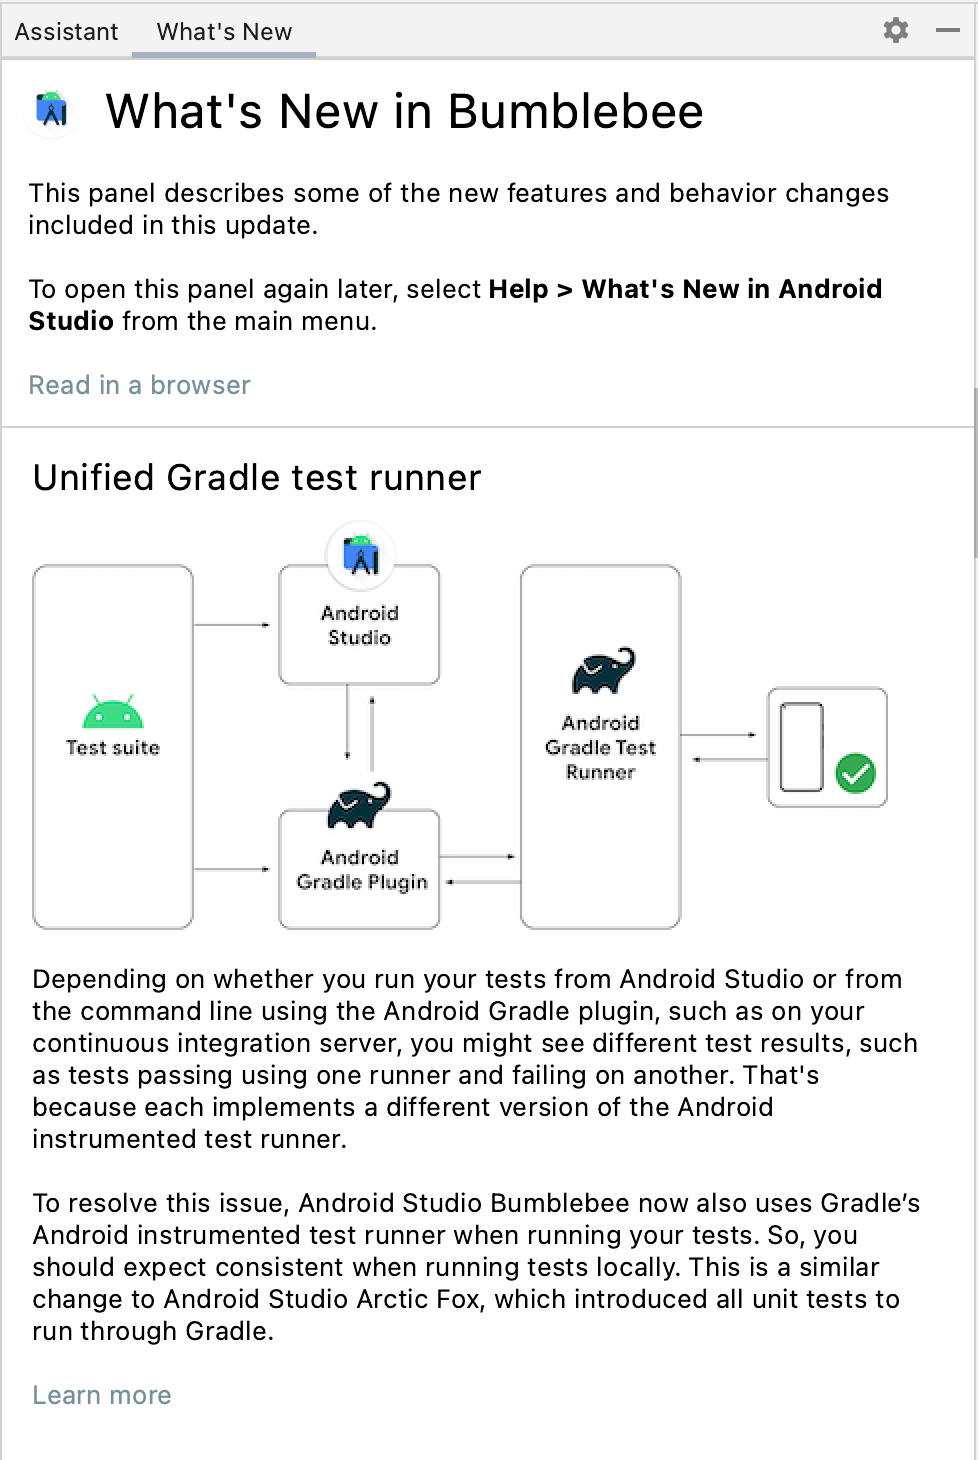 This image shows the What's New pane, which provides information about updates in Android Studio.